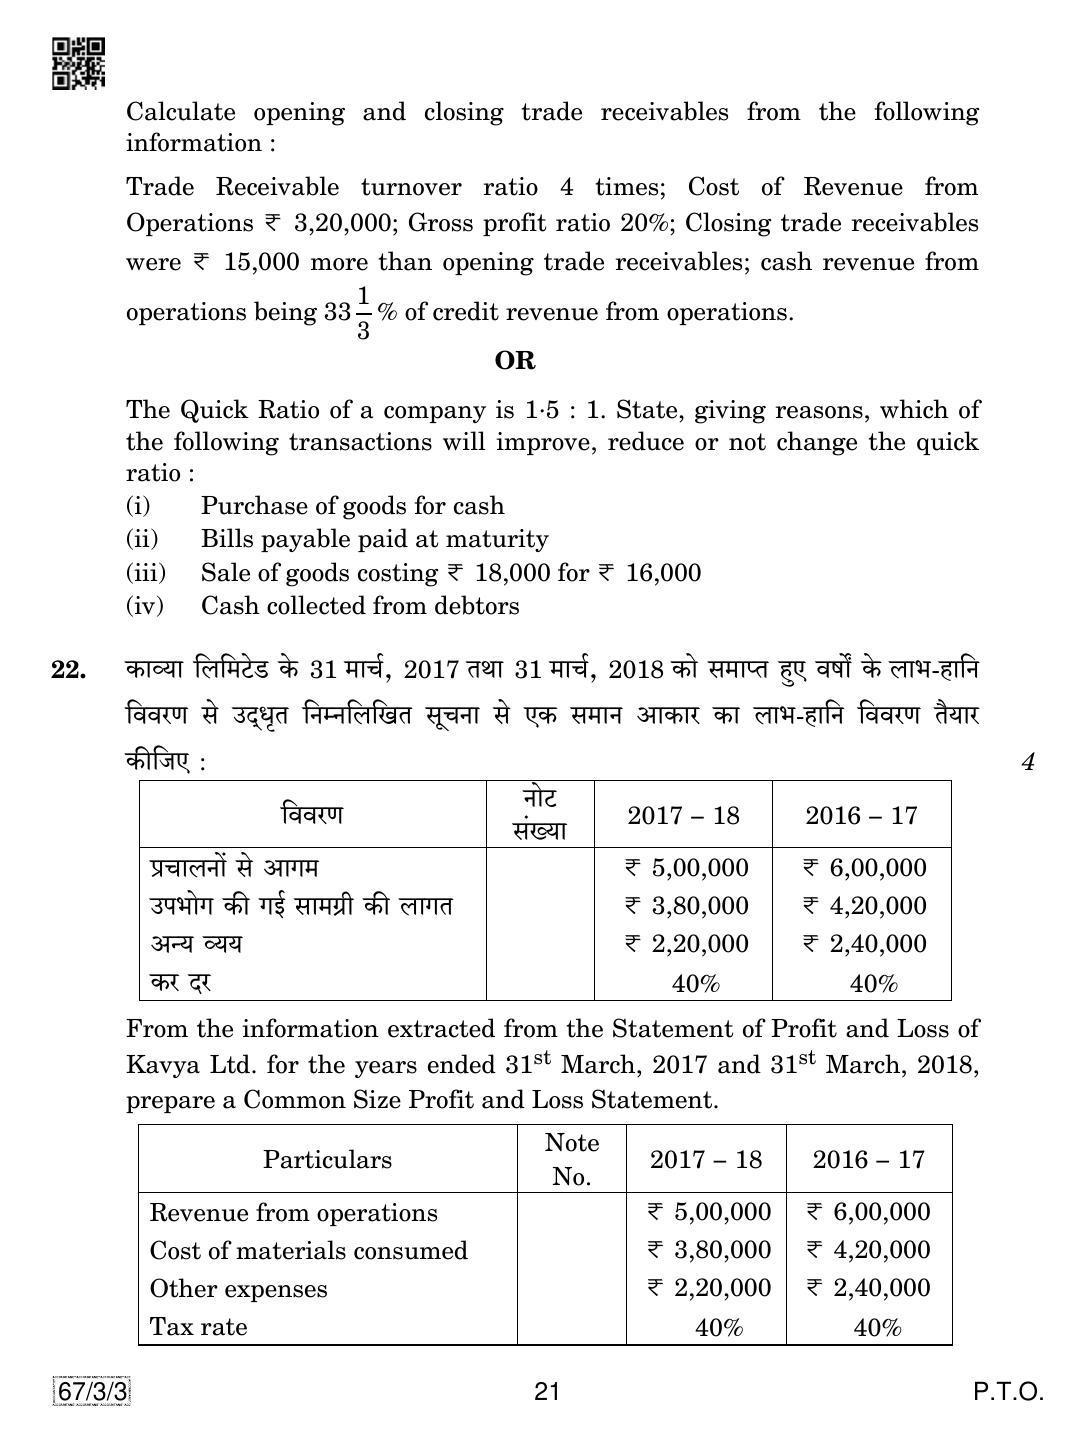 CBSE Class 12 67-3-3 Accountancy 2019 Question Paper - Page 21